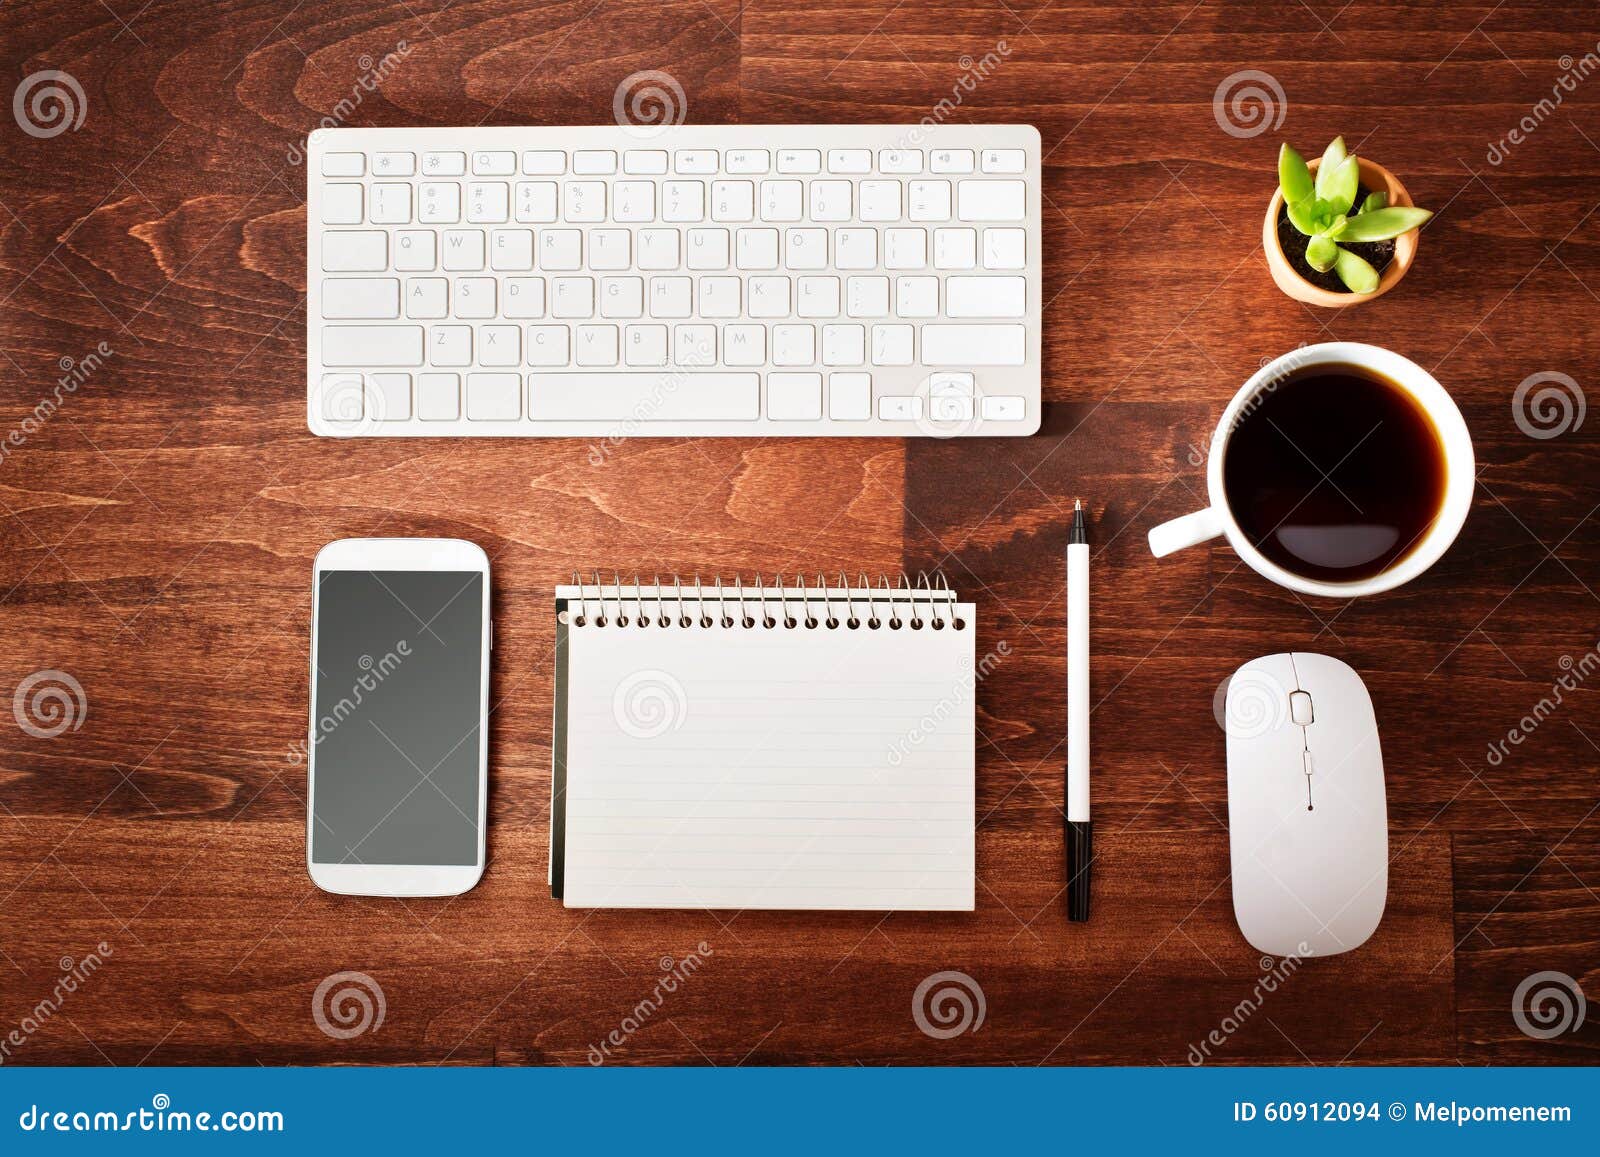 Neat Workstation On A Wooden Desk Stock Photo Image Of Cellphone